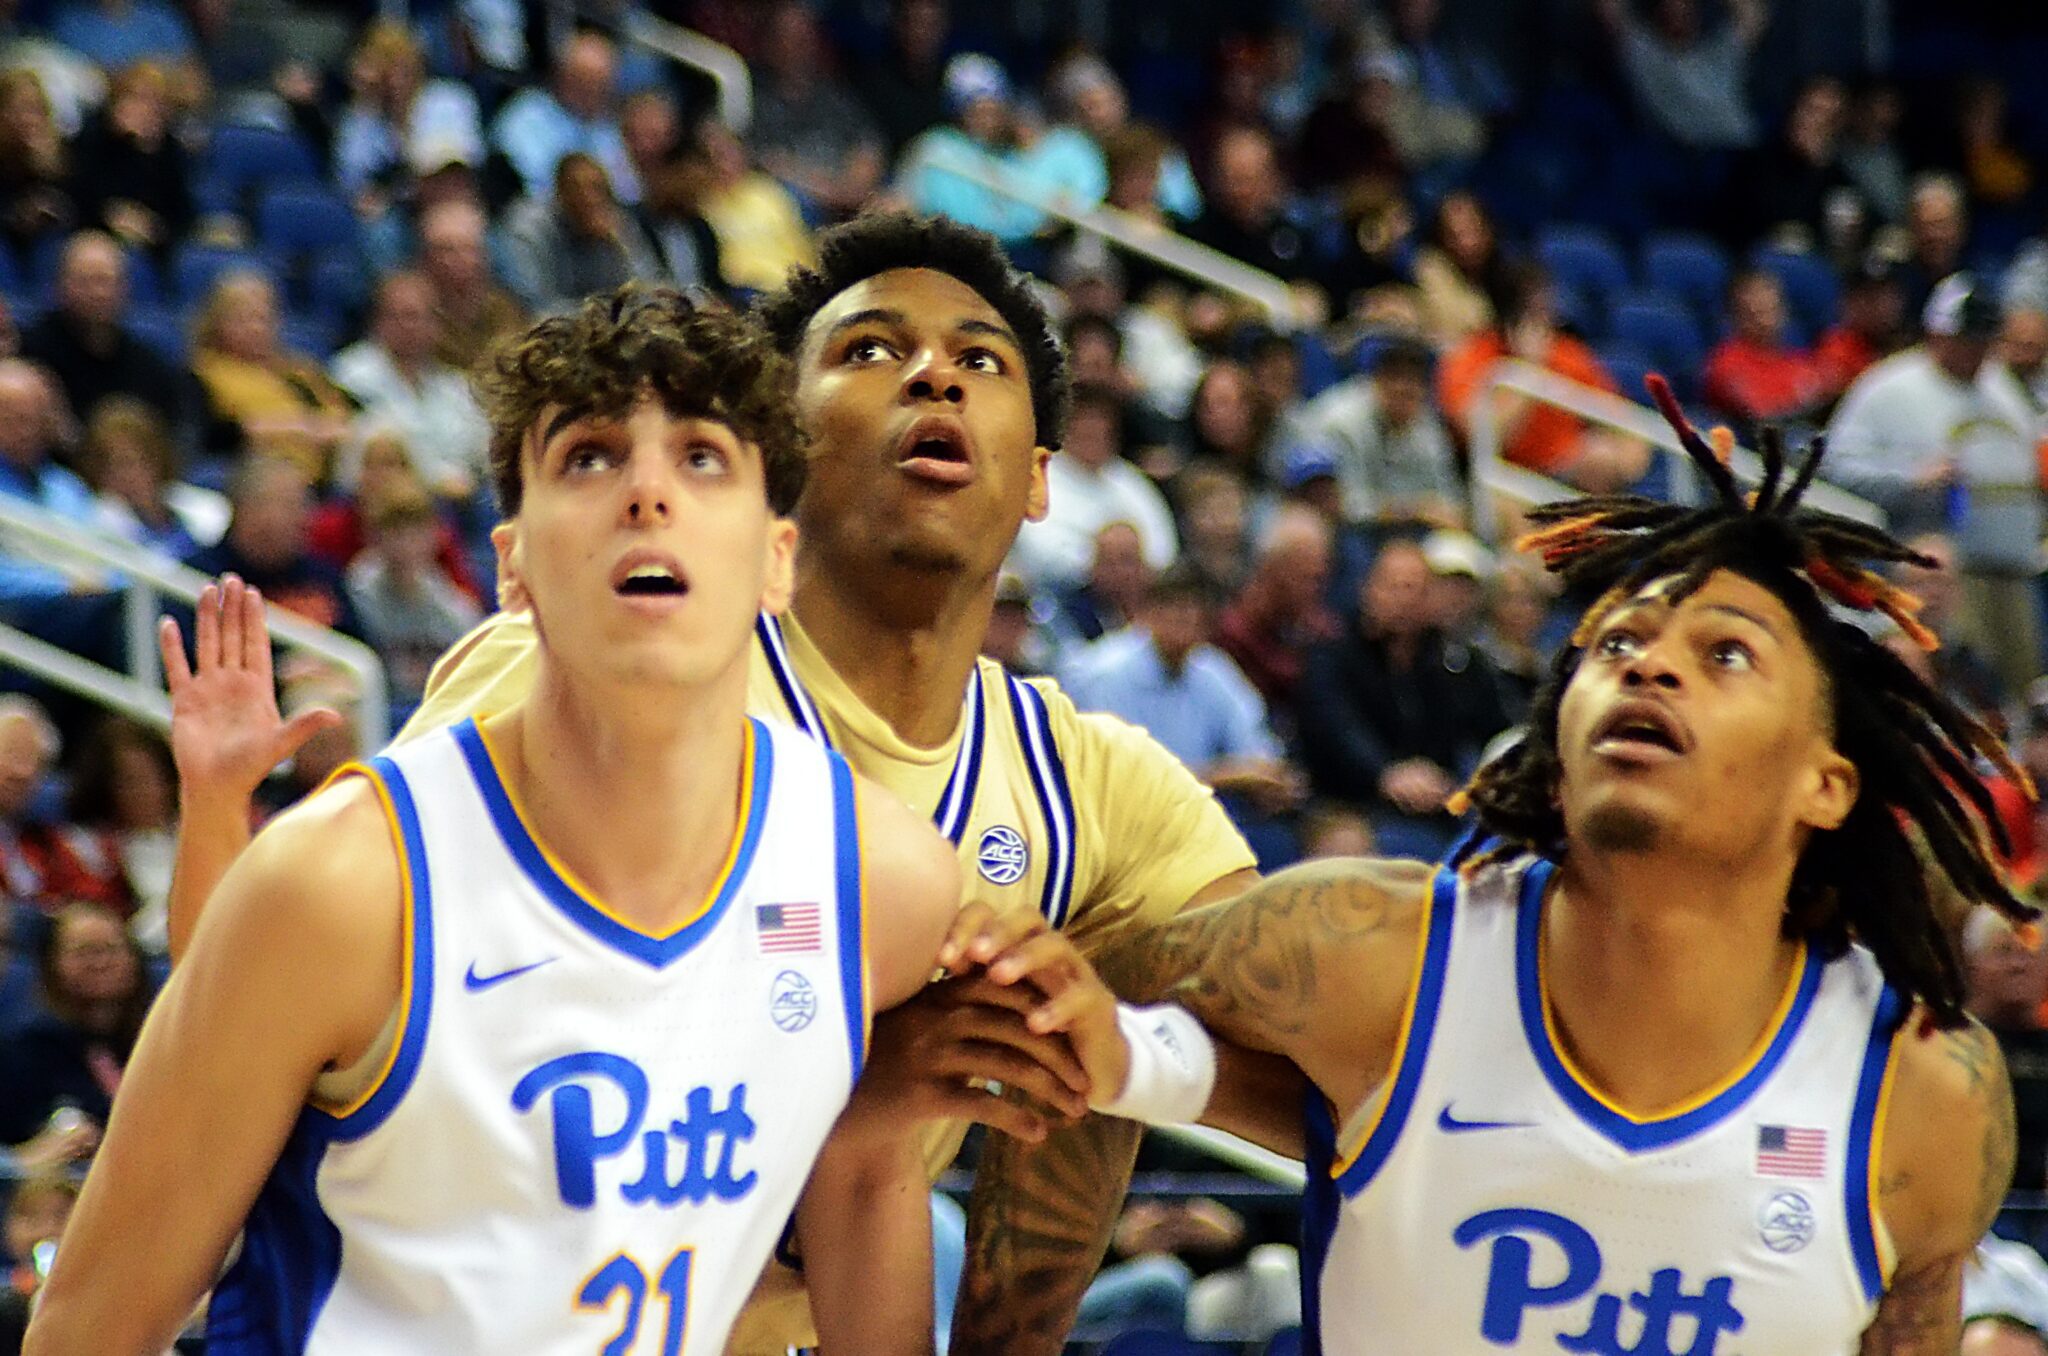 Guillermo Diaz Graham and Nike Sibande box out for a rebound during Pitt's ACC Tournament game vs. Georgia Tech in Greensboro, N.C. on March 8, 2023. (Mitchell Northam / Pittsburgh Sports Now)